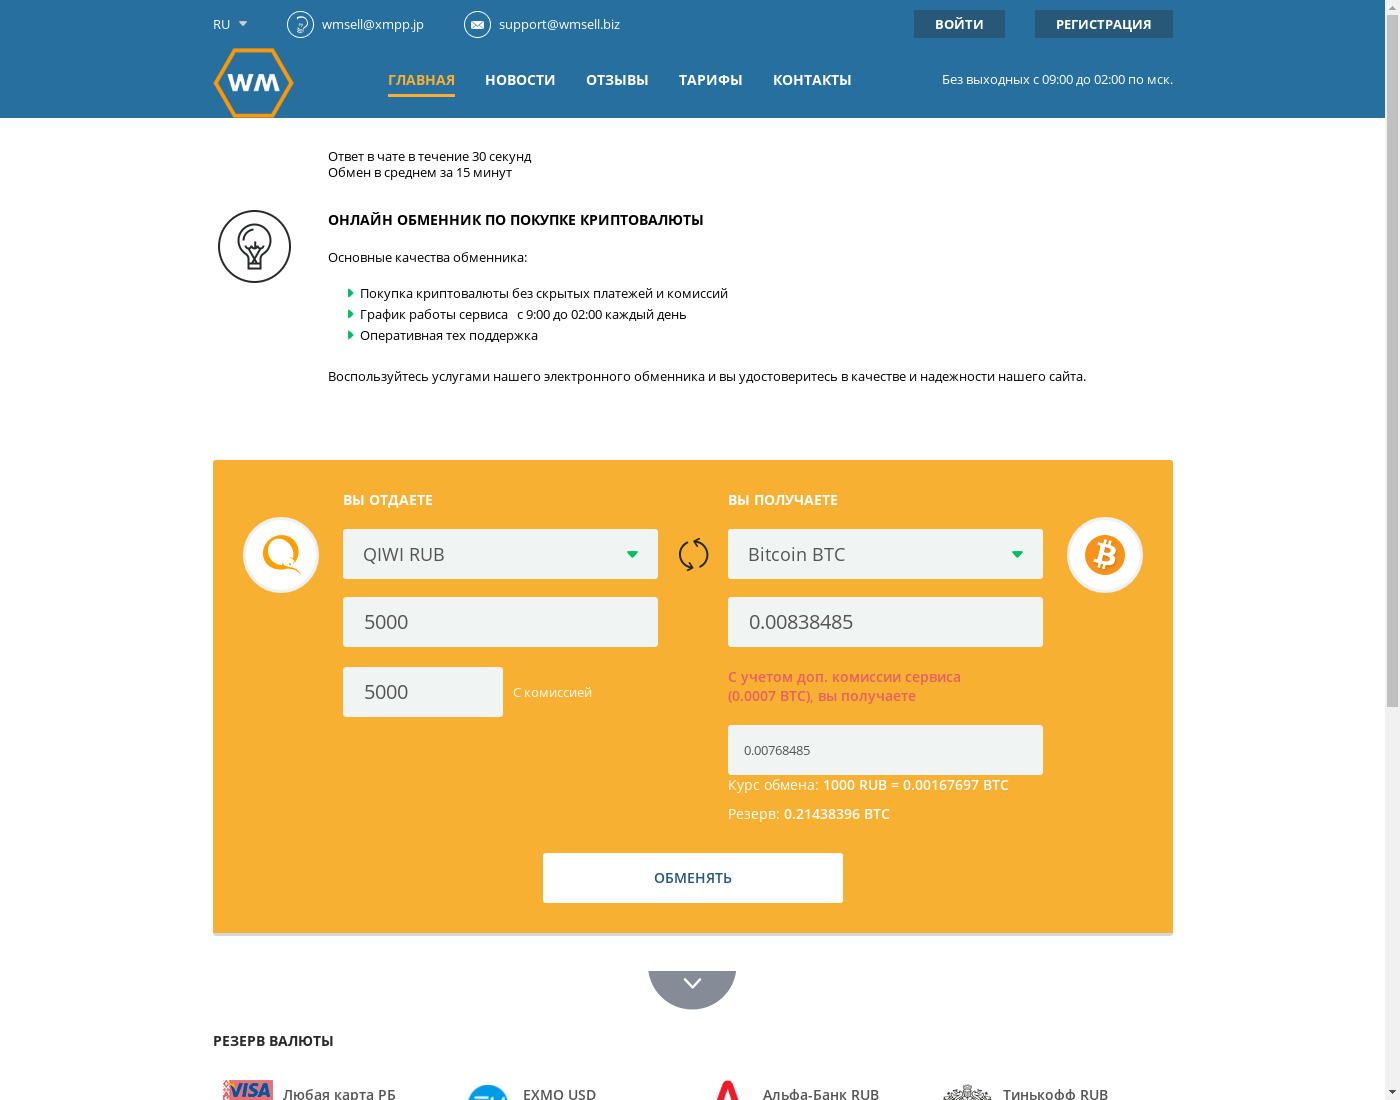 wmsell user interface: the home page in English